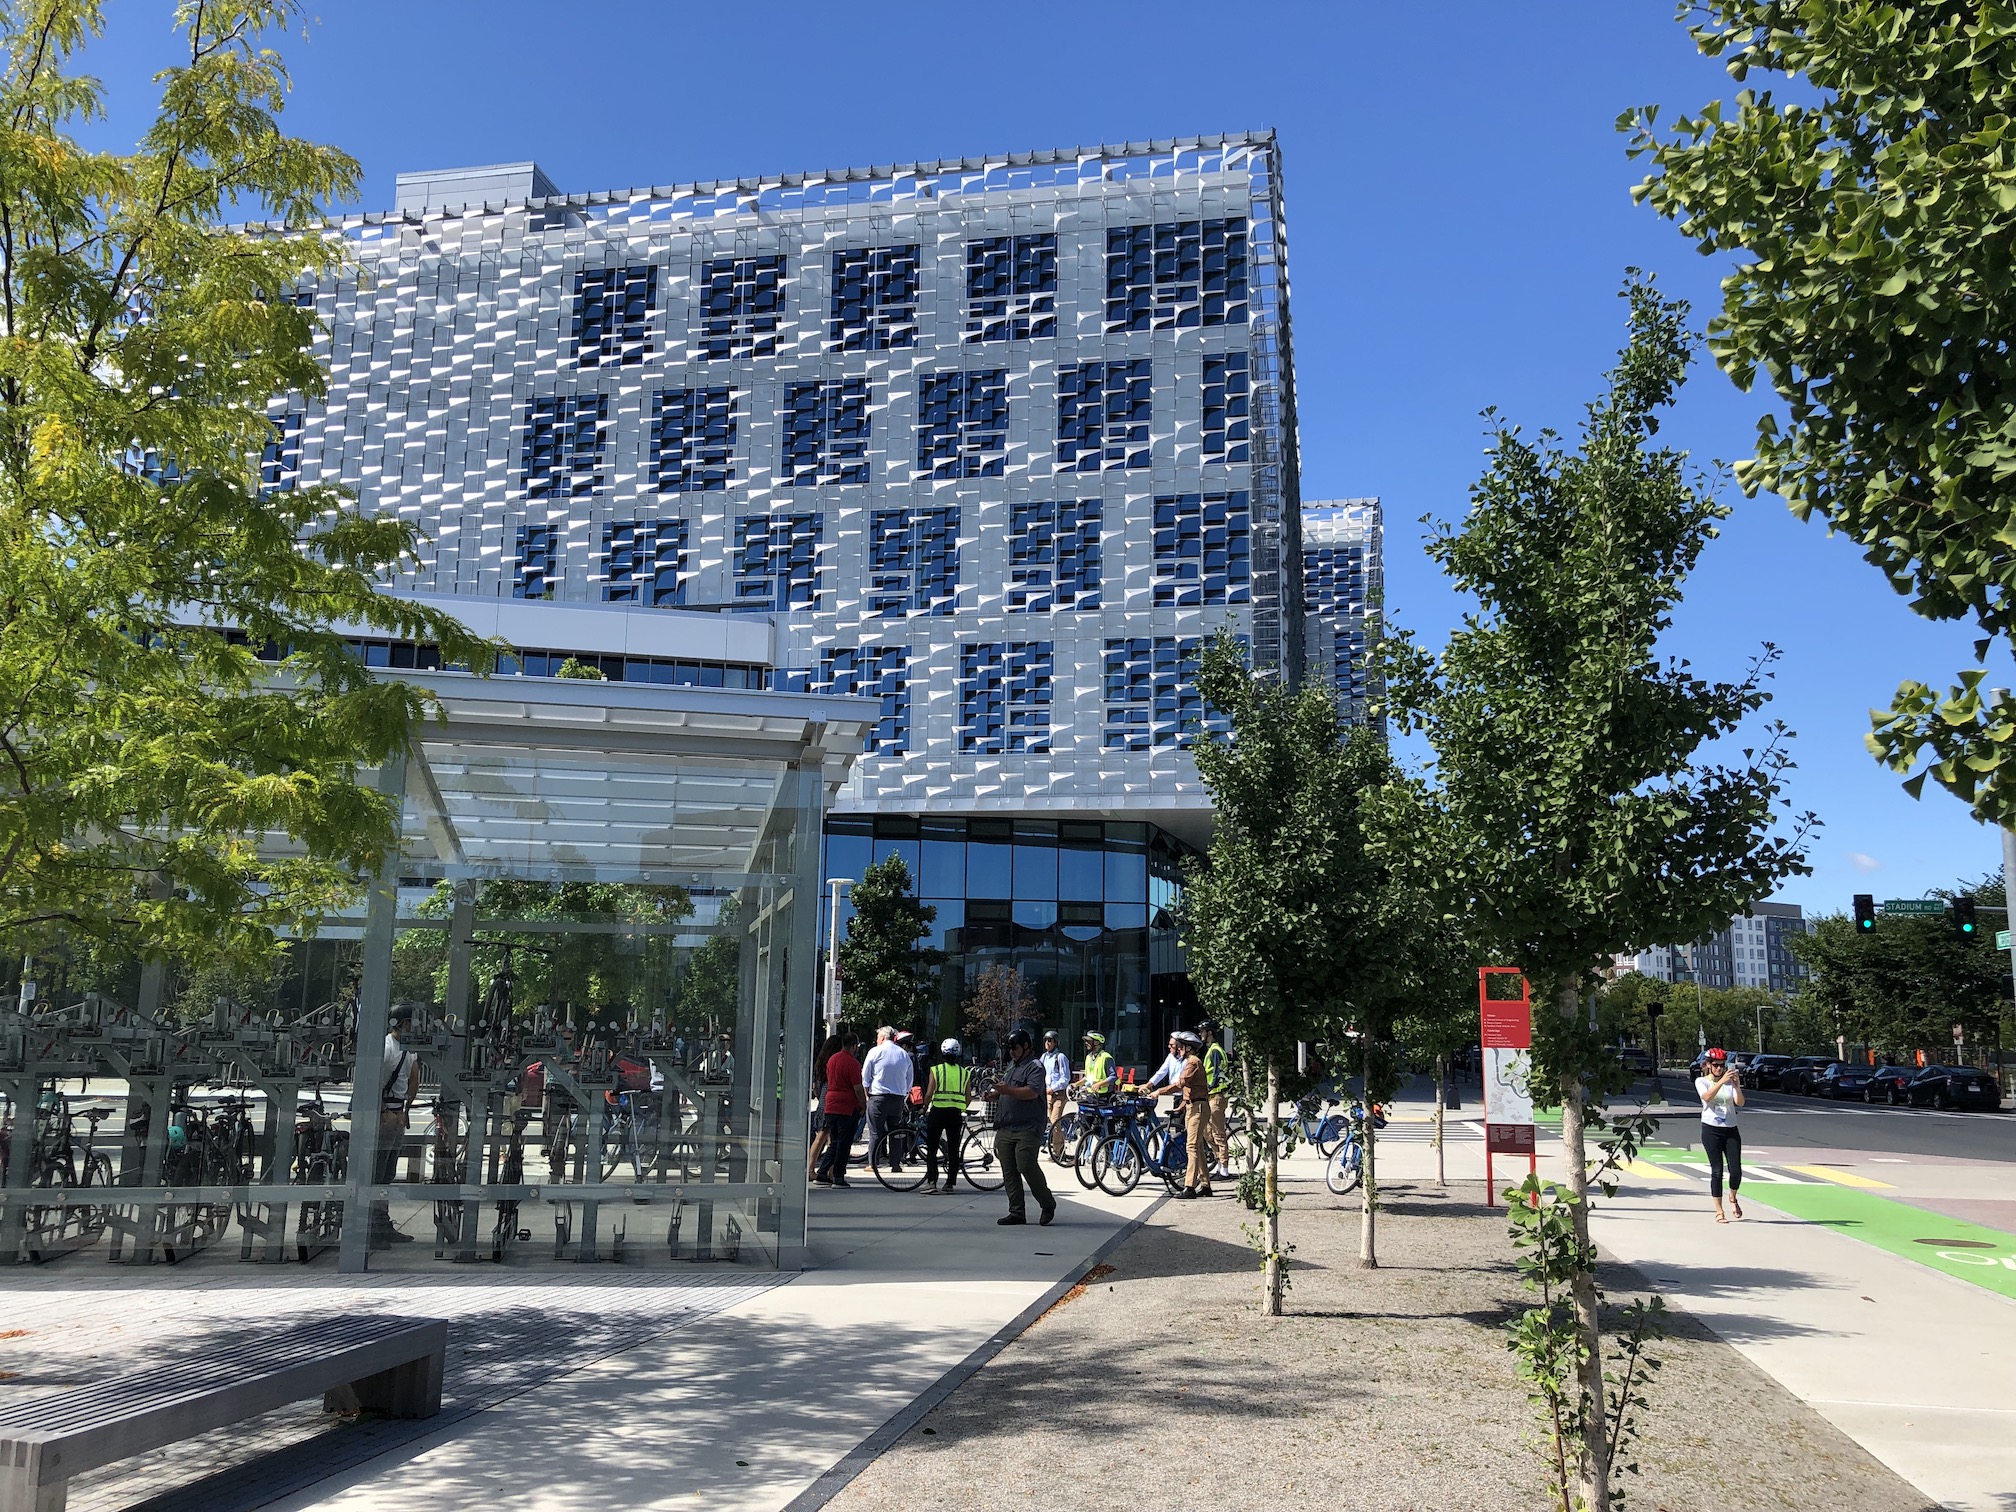 An exterior photo of the new Harvard Engineering School building, next to a protected bike lane. A large group of people on bikes is gathered in the foreground next to a glass-clad bike parking shed while a jogger runs by on the sidewalk.